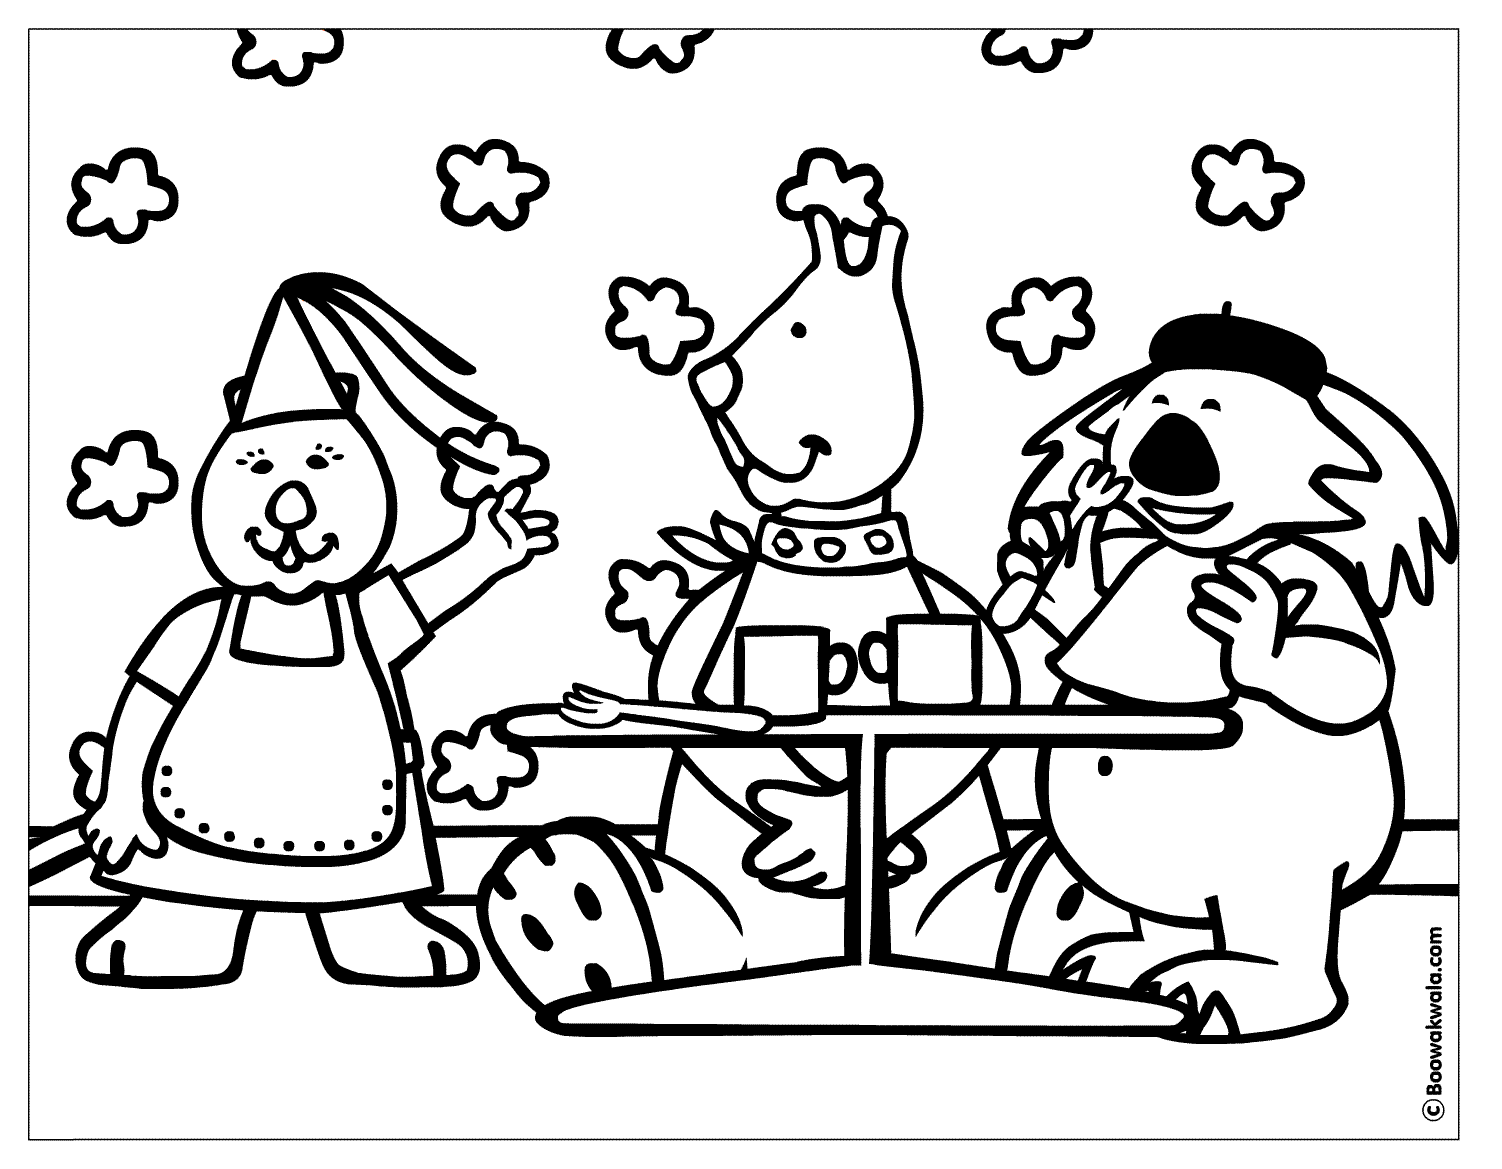 breakfast coloring page eat a healthy breakfast coloring page worksheet village coloring page breakfast 